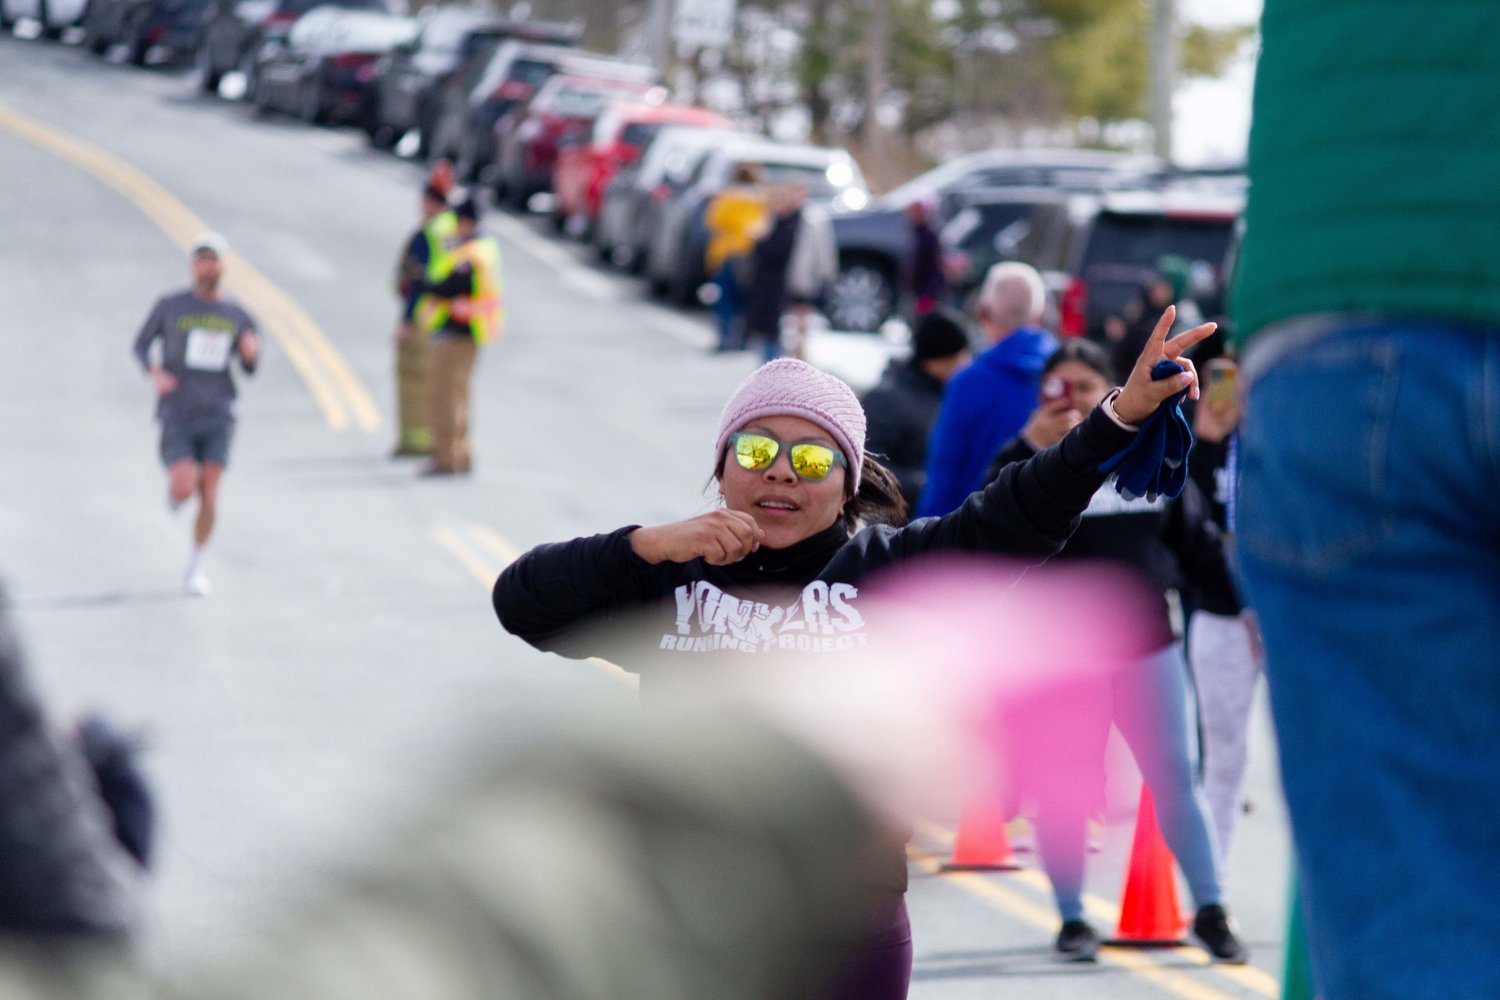 Despite the bitter cold and snow, these unstoppable racers refused to be deterred as they participated in the Celebrate Life Half Marathon and Lucia Rein Two-Person Relay in Rock Hill.